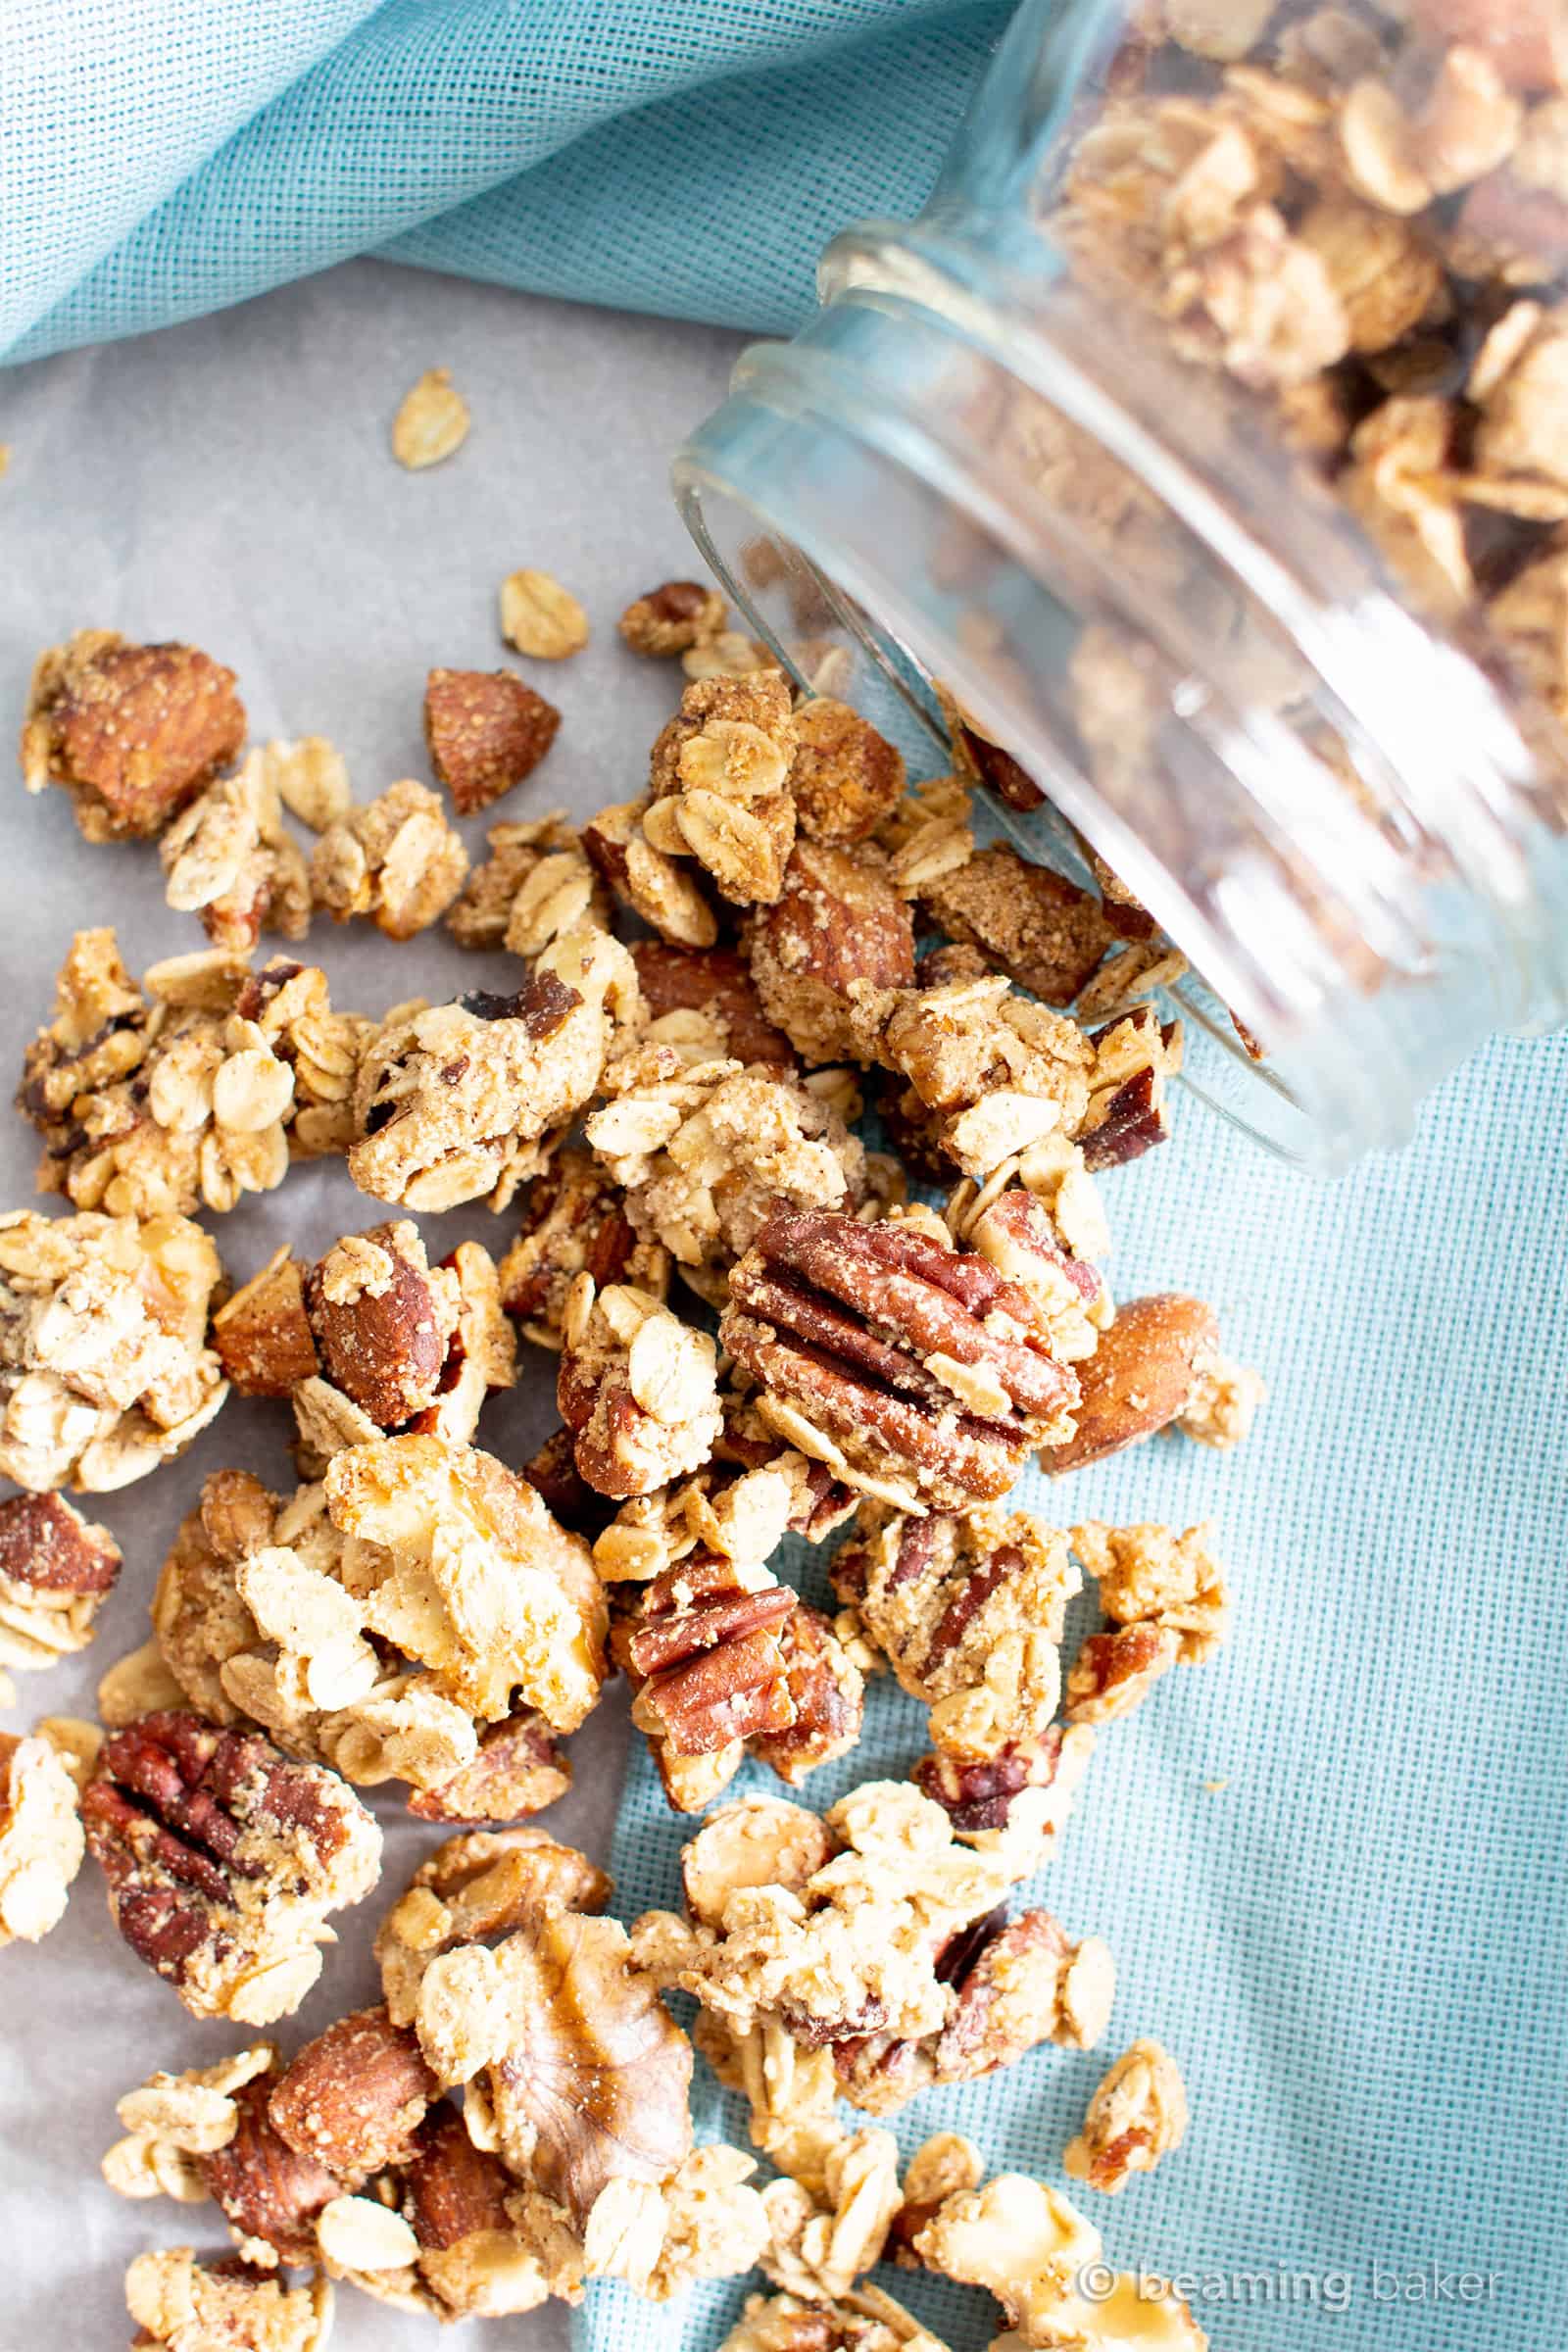 25+ Healthy Breakfast Cookies and Bars Recipes + More (Vegan, Gluten-Free): this collection of healthy breakfast cookies and bars recipes includes homemade breakfast bars, easy breakfast cookies, dairy-free vegan muffins and more! #Vegan #GlutenFree #Healthy #Breakfast #Snacks #DairyFree | Recipes at BeamingBaker.com